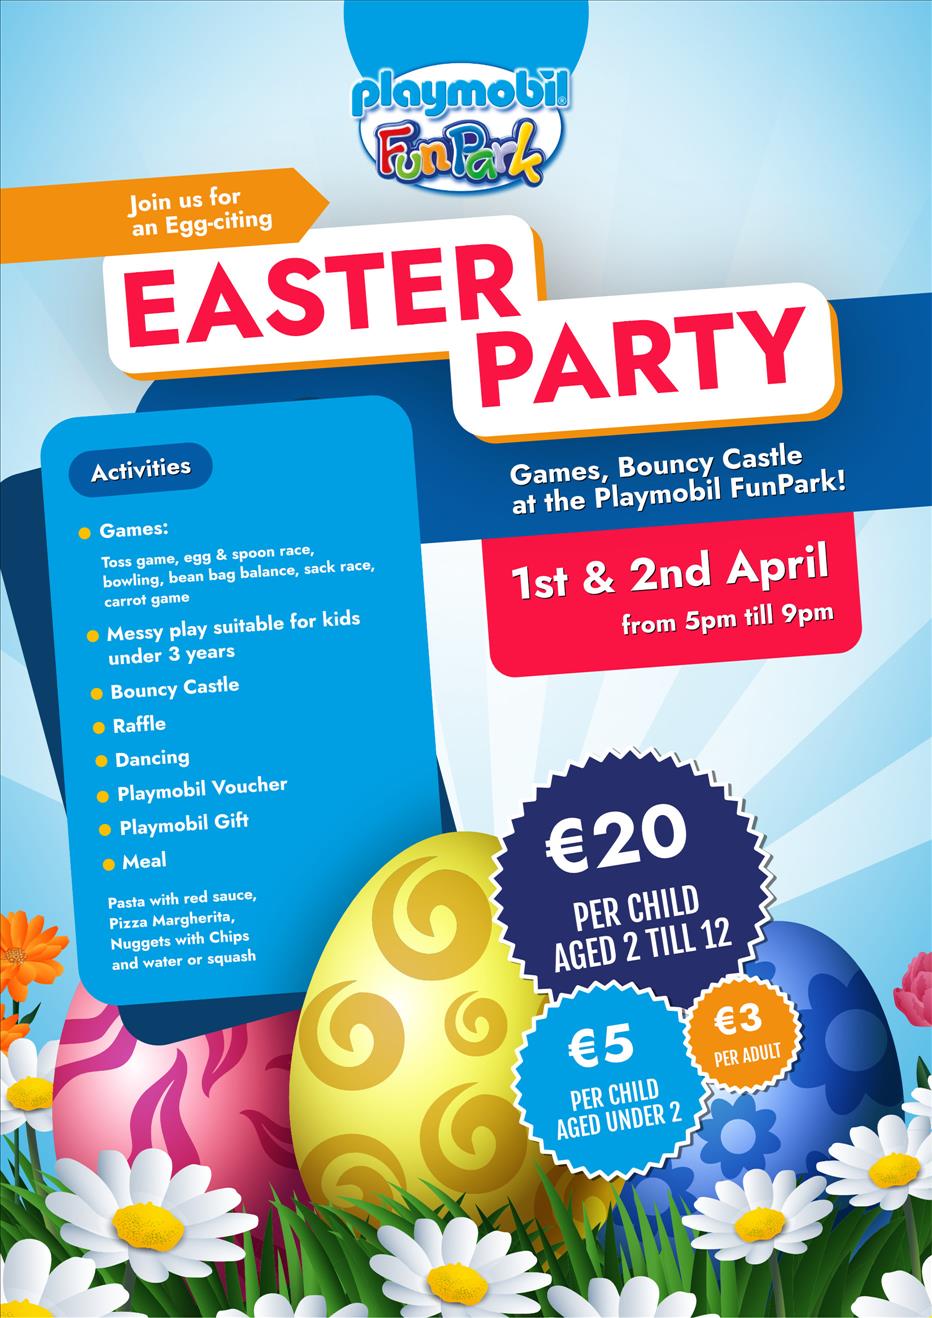 Egg-citing Playmobil Easter Party!